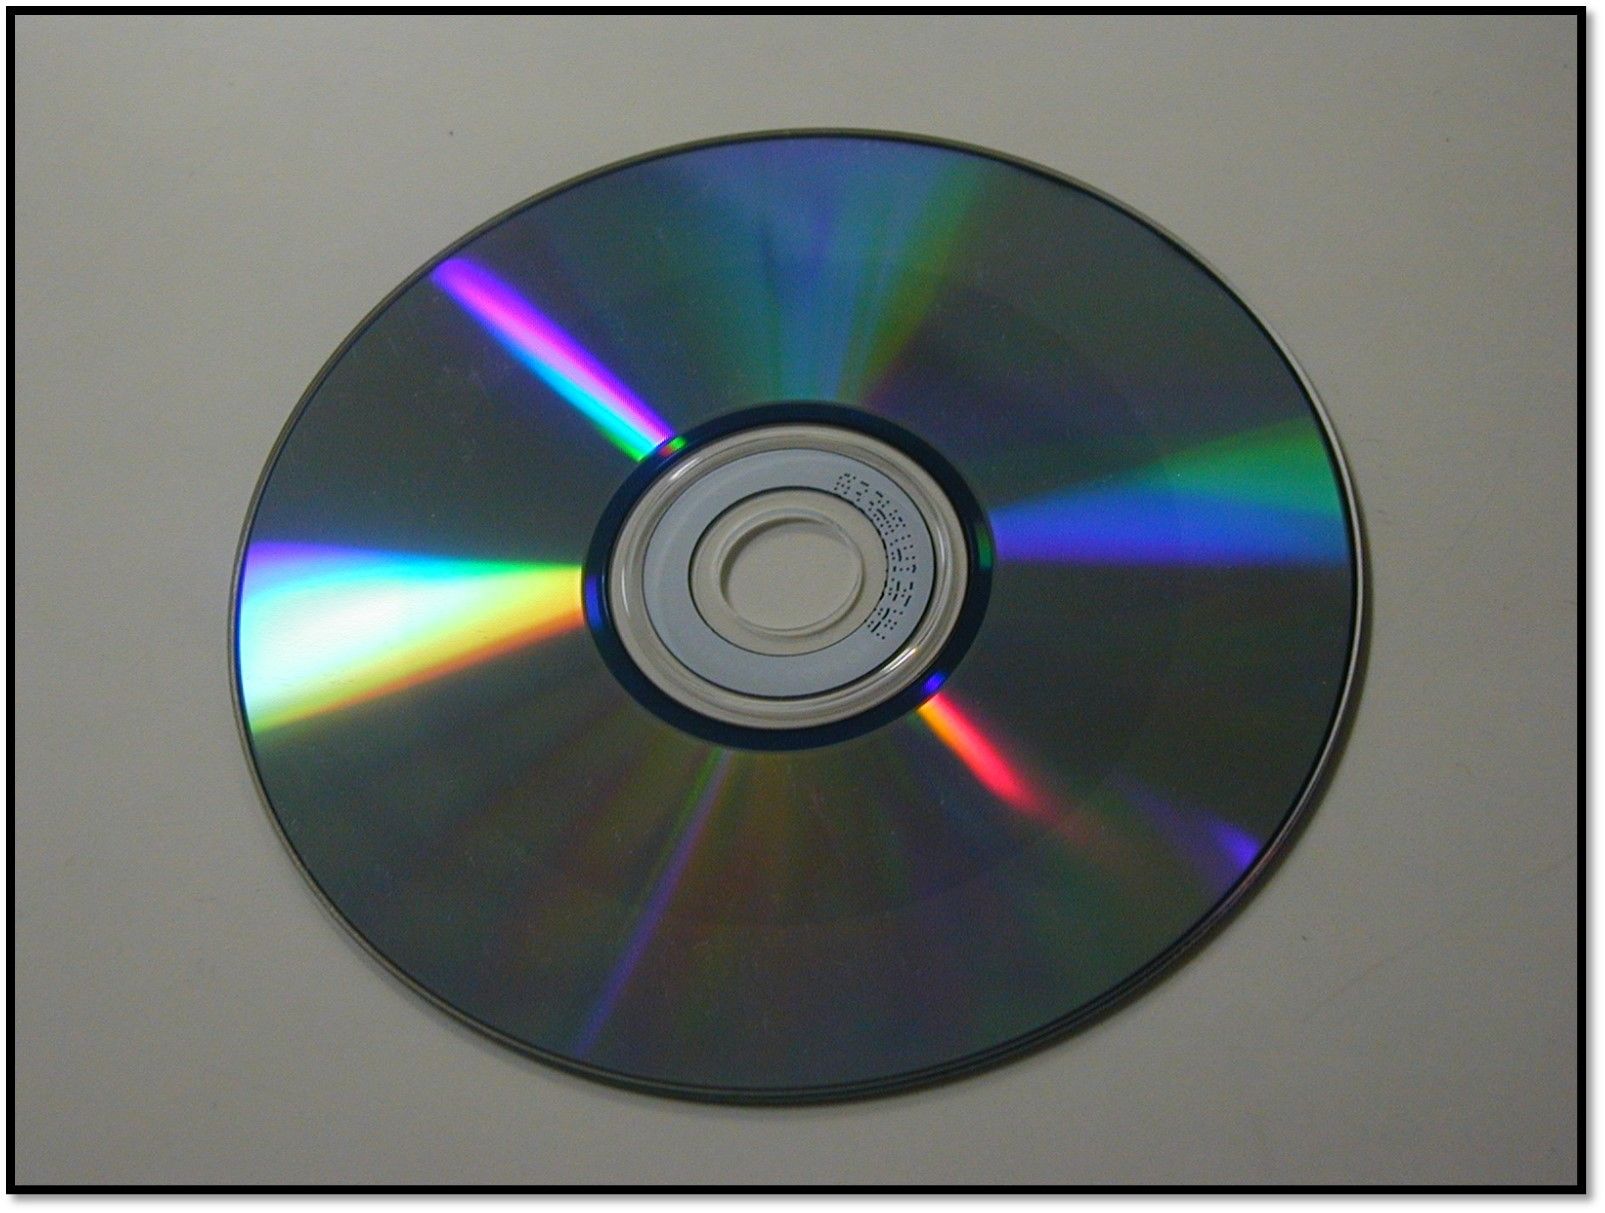 A much less shiny side of CD-RW